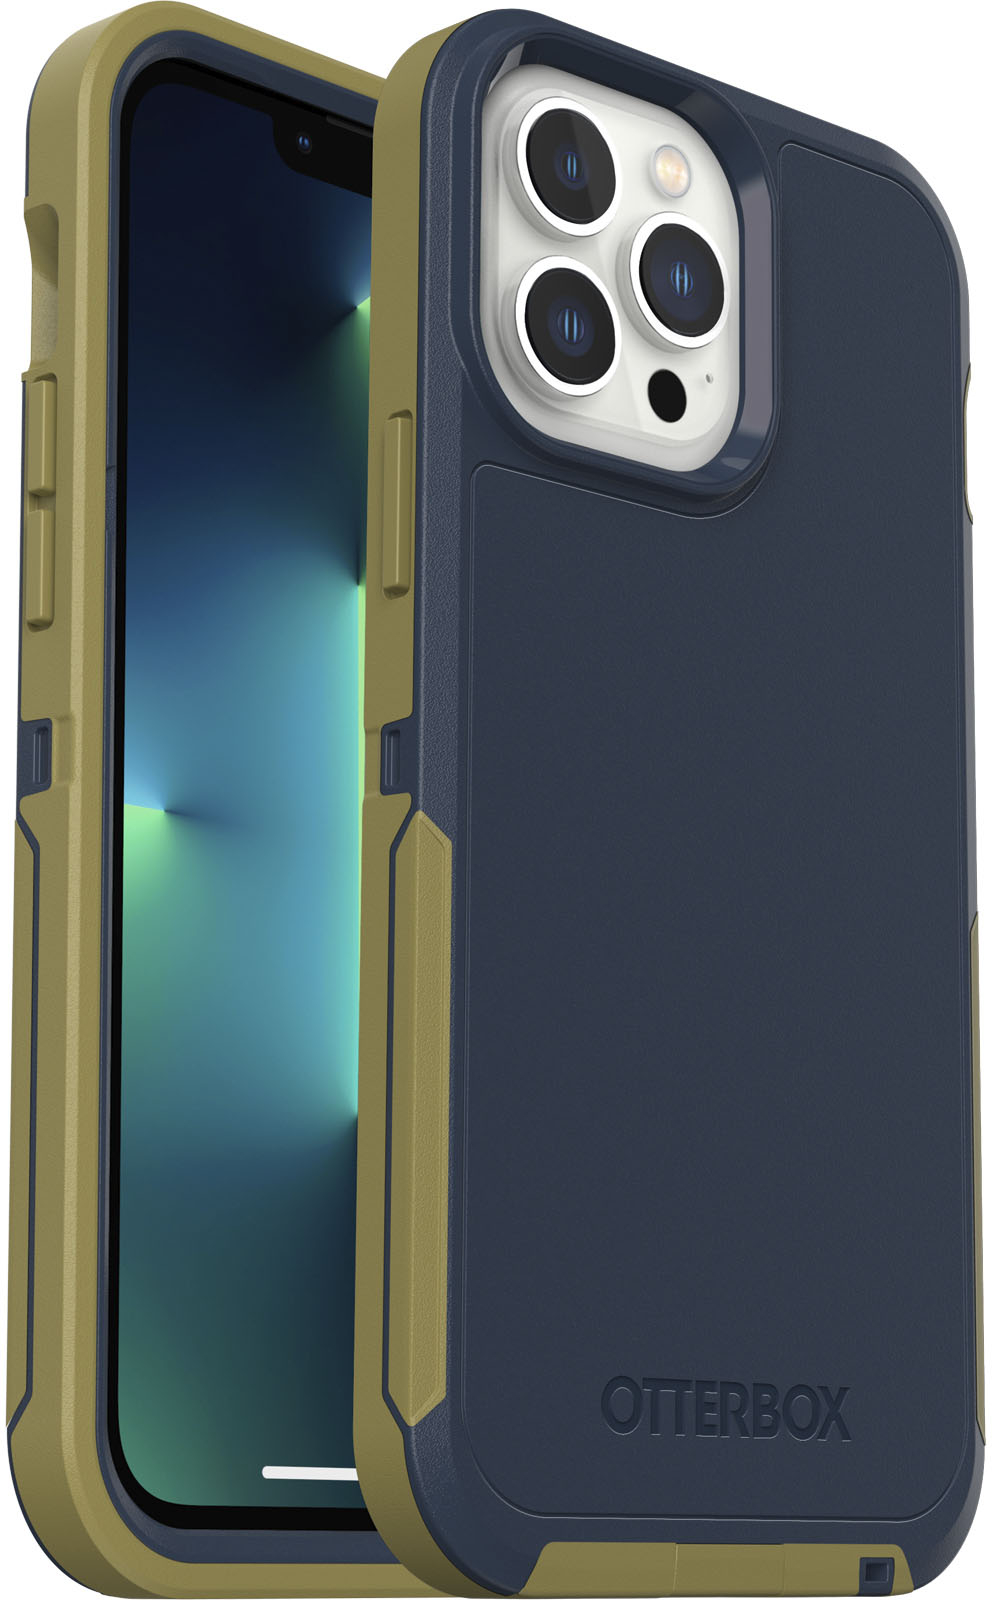 Angle View: OtterBox - Defender Series Pro XT Hard Shell for Apple iPhone 13 Pro Max and iPhone 12 Pro Max - Dark Mineral